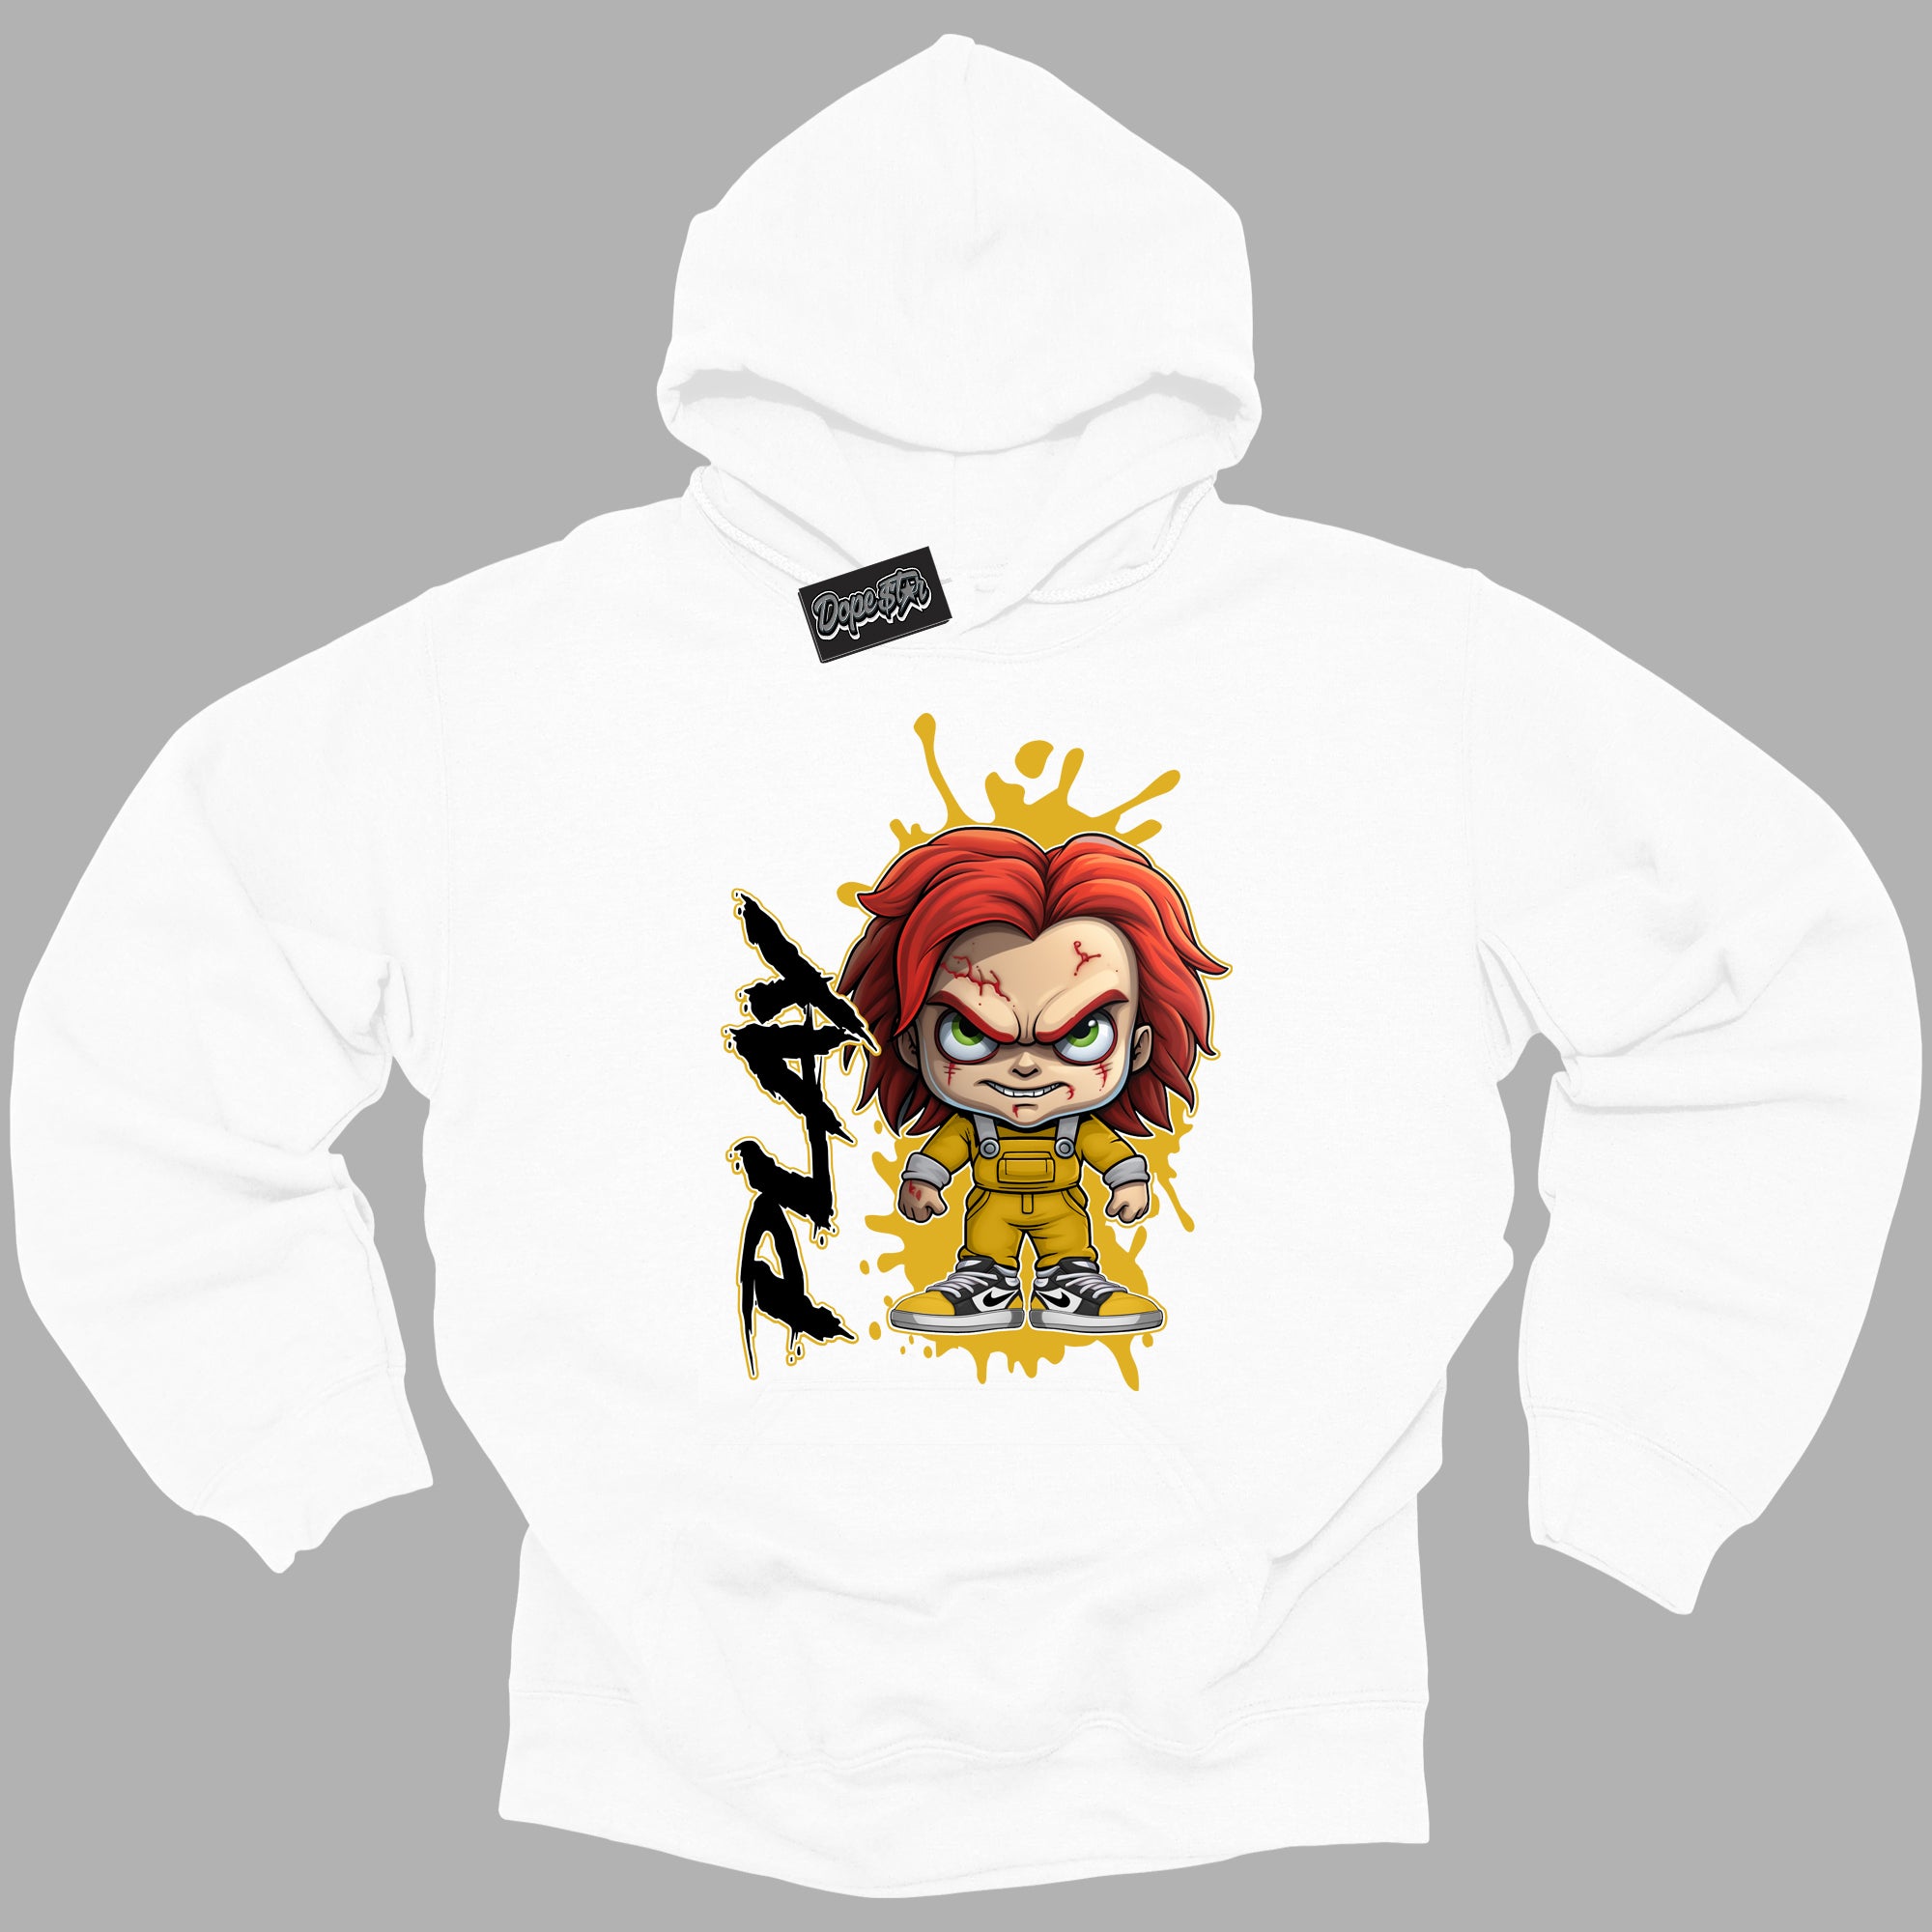 Cool White Hoodie with “ Play ”  design that Perfectly Matches Yellow Ochre 6s Sneakers.